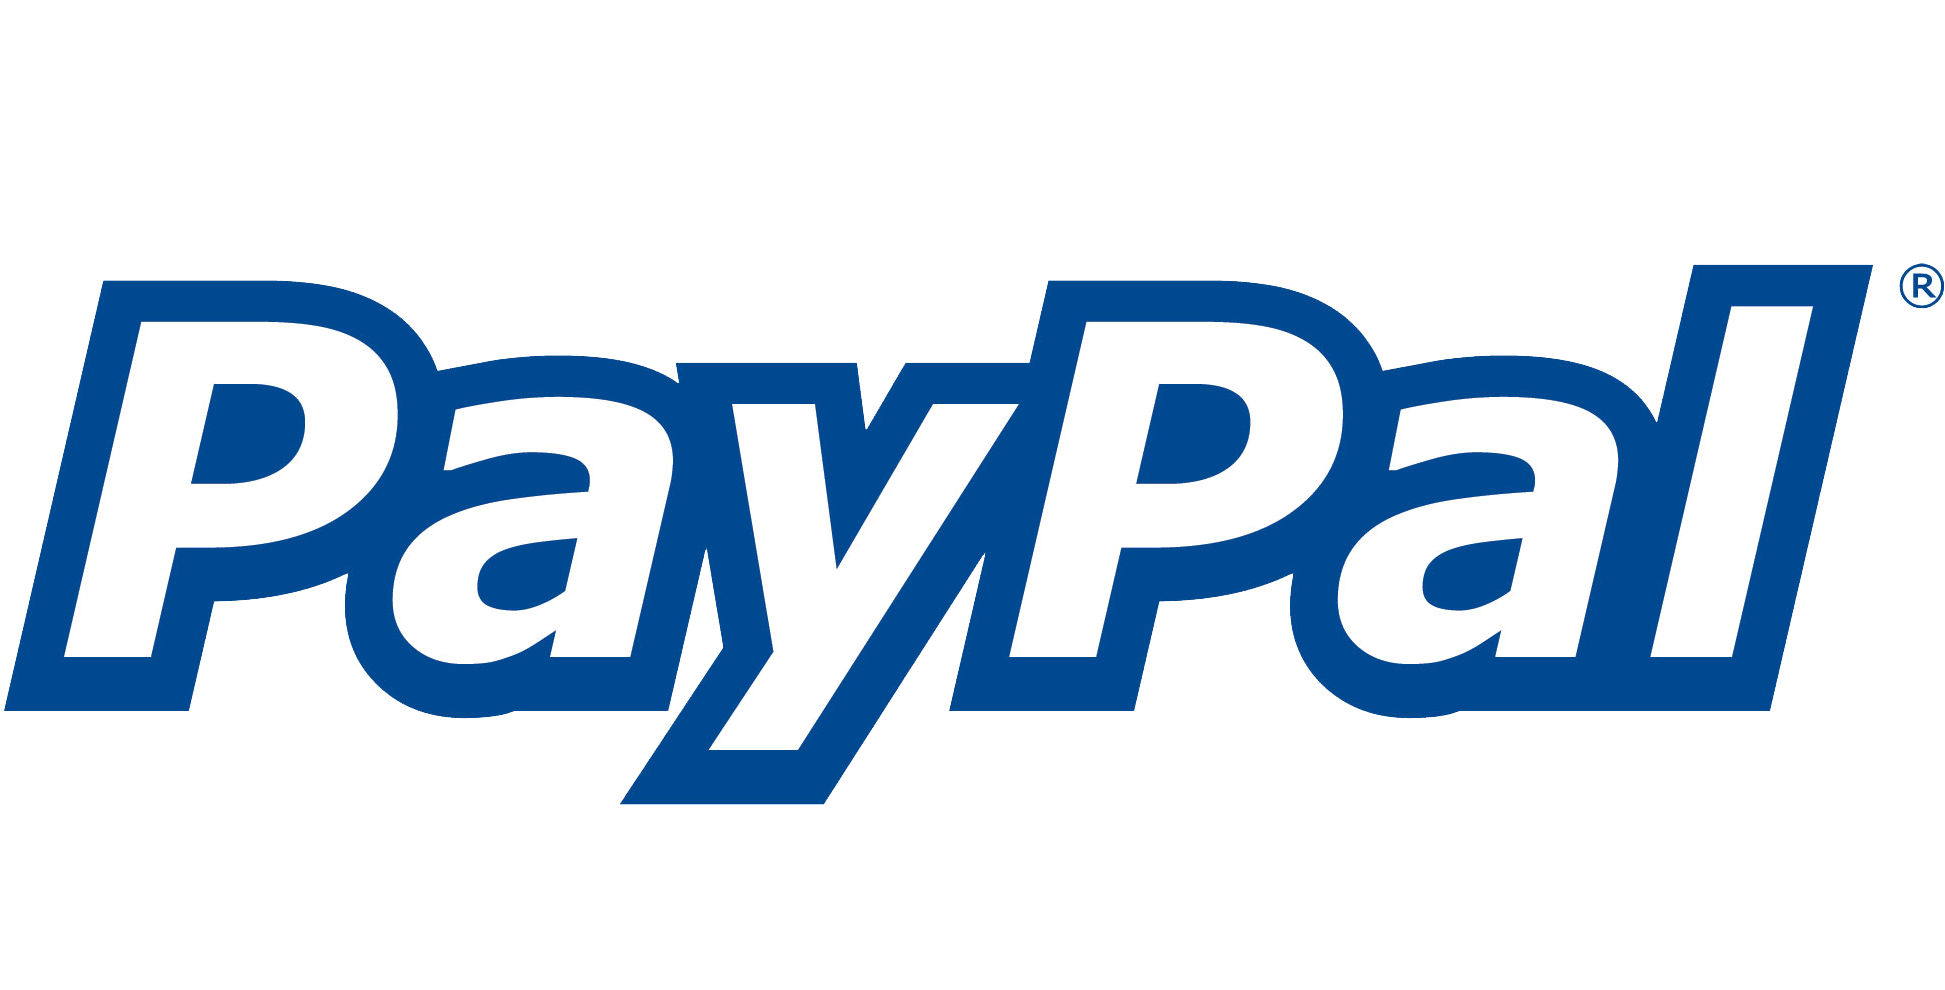 PayPal icon. PNG 50 px